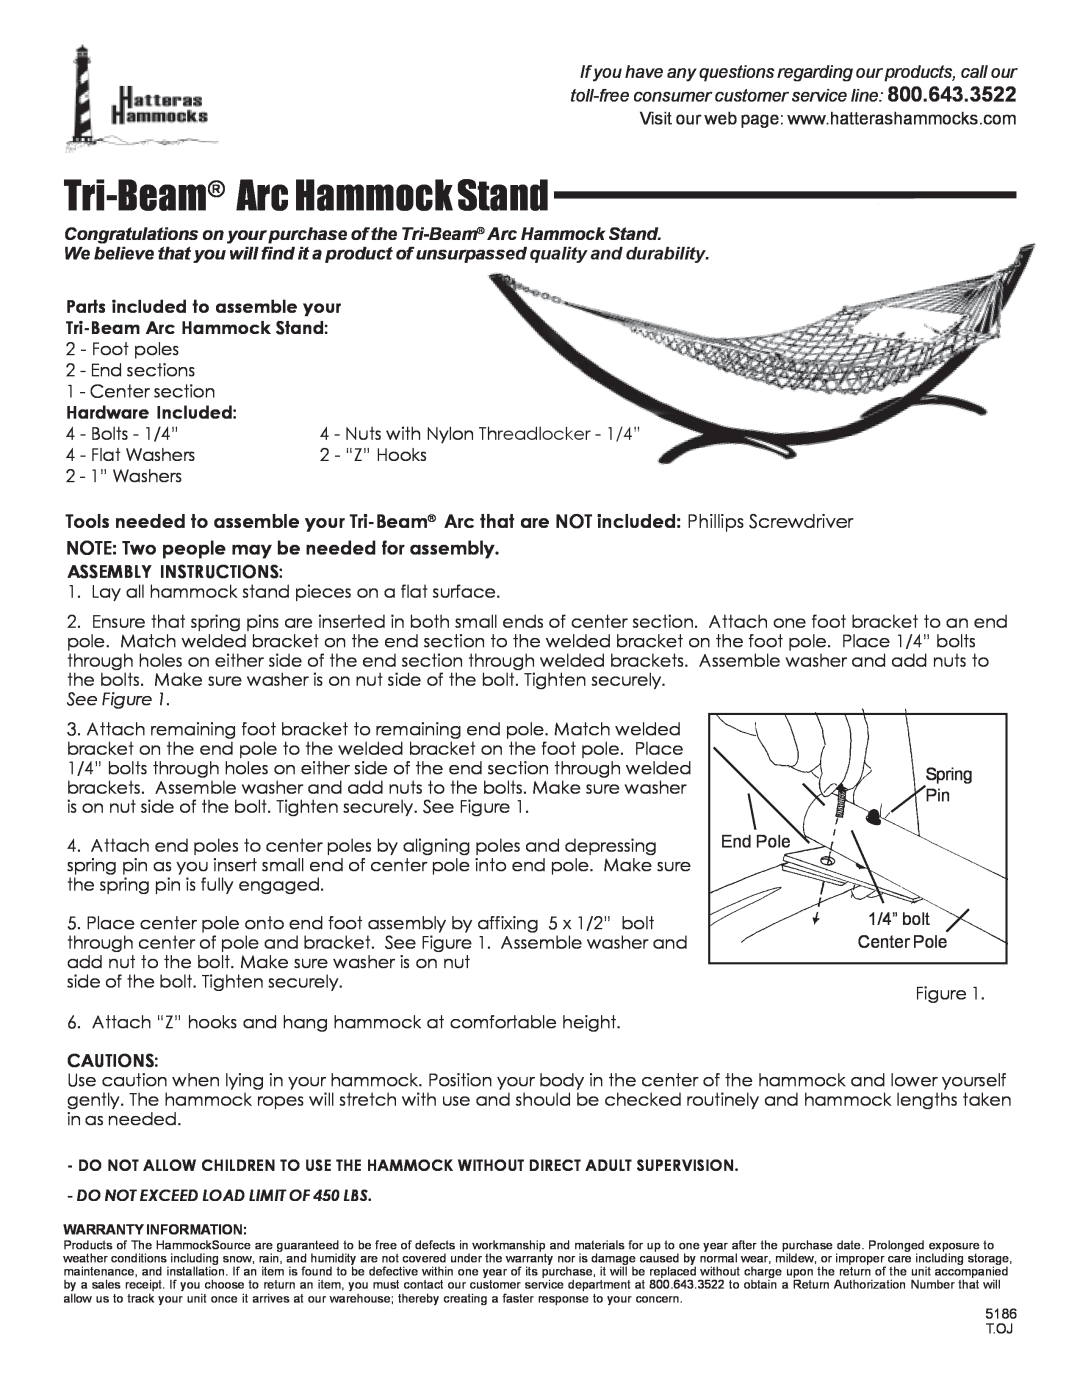 Hatteras Hammocks warranty Tri-Beam Arc Hammock Stand, NOTE Two people may be needed for assembly, Hardware Included 